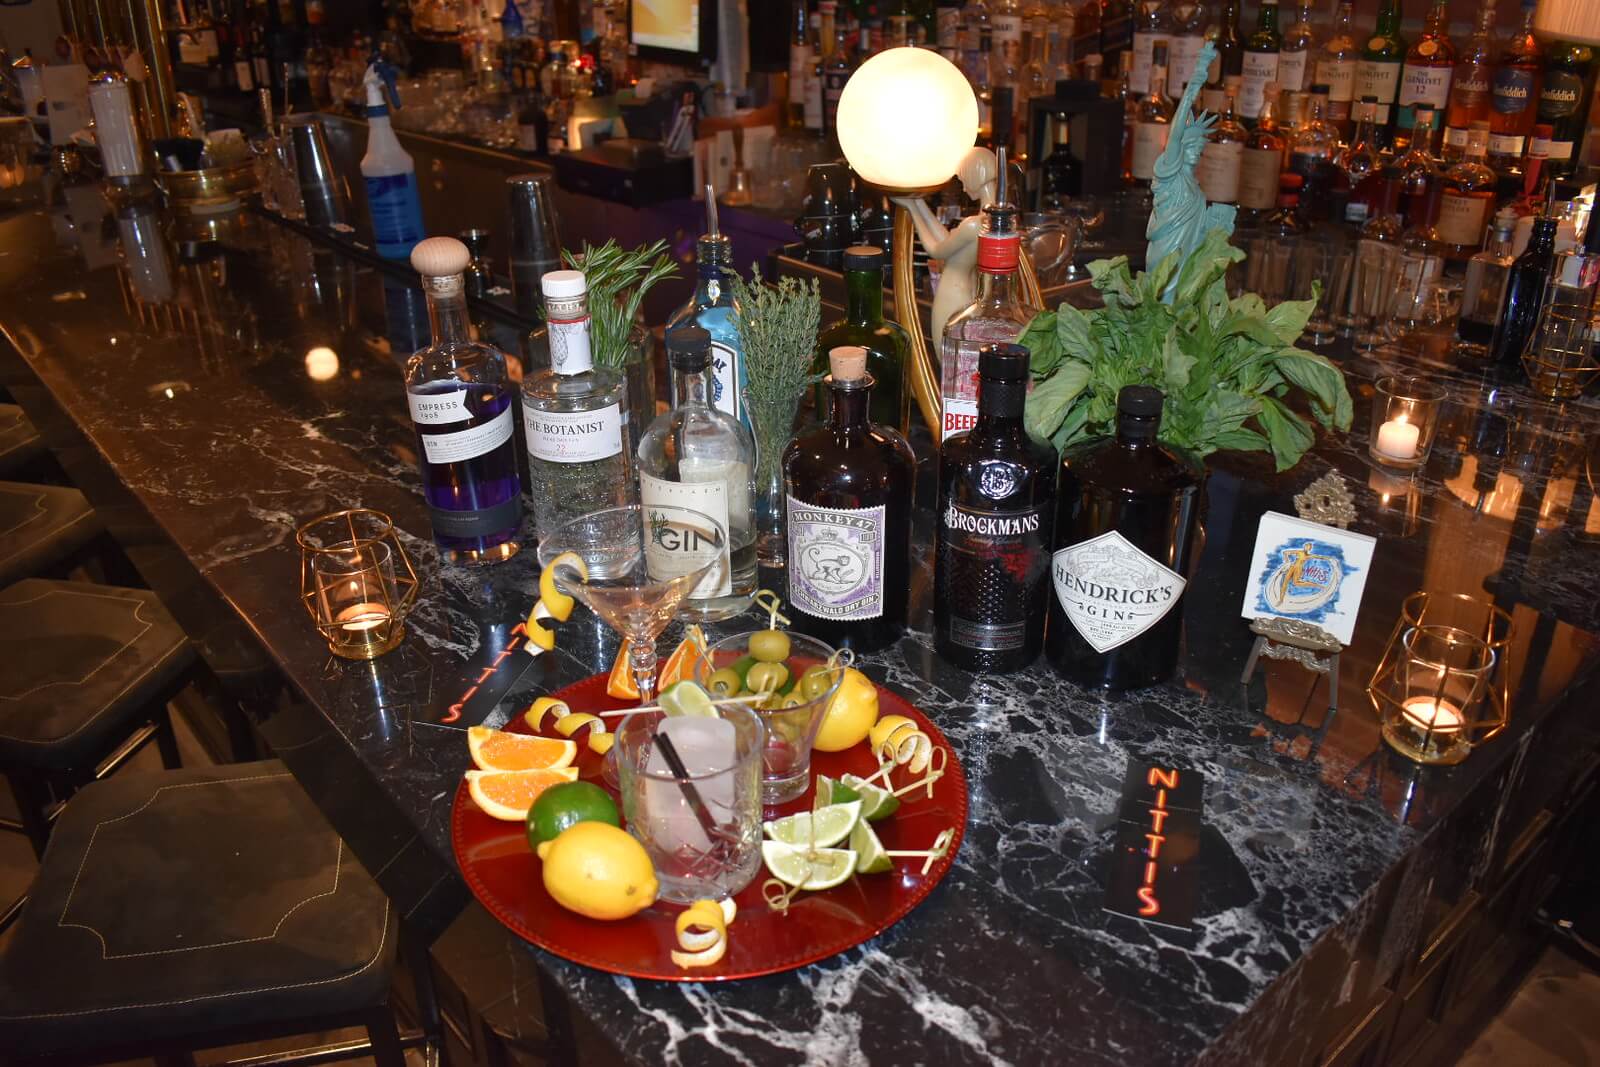 Red plate with a shot glass and citrus slices in front of liquor bottles and herb garnishes on the bar